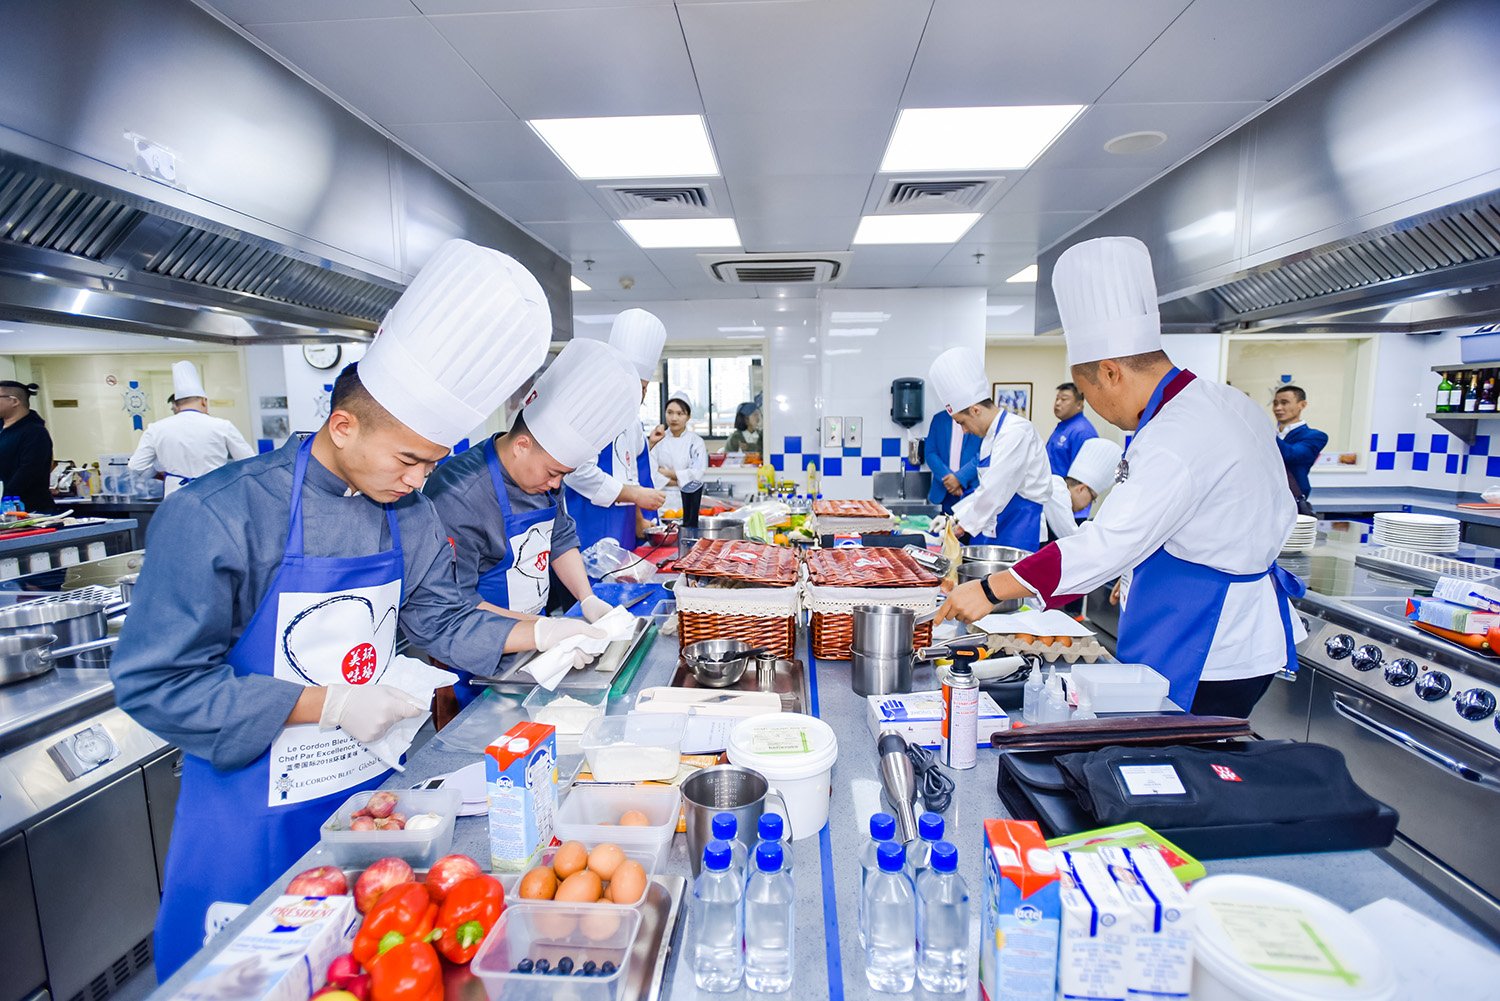 Le Cordon Bleu 2018 Global Gourmet Chef par Excellence Culinary Competition: All Winners Finally Announced